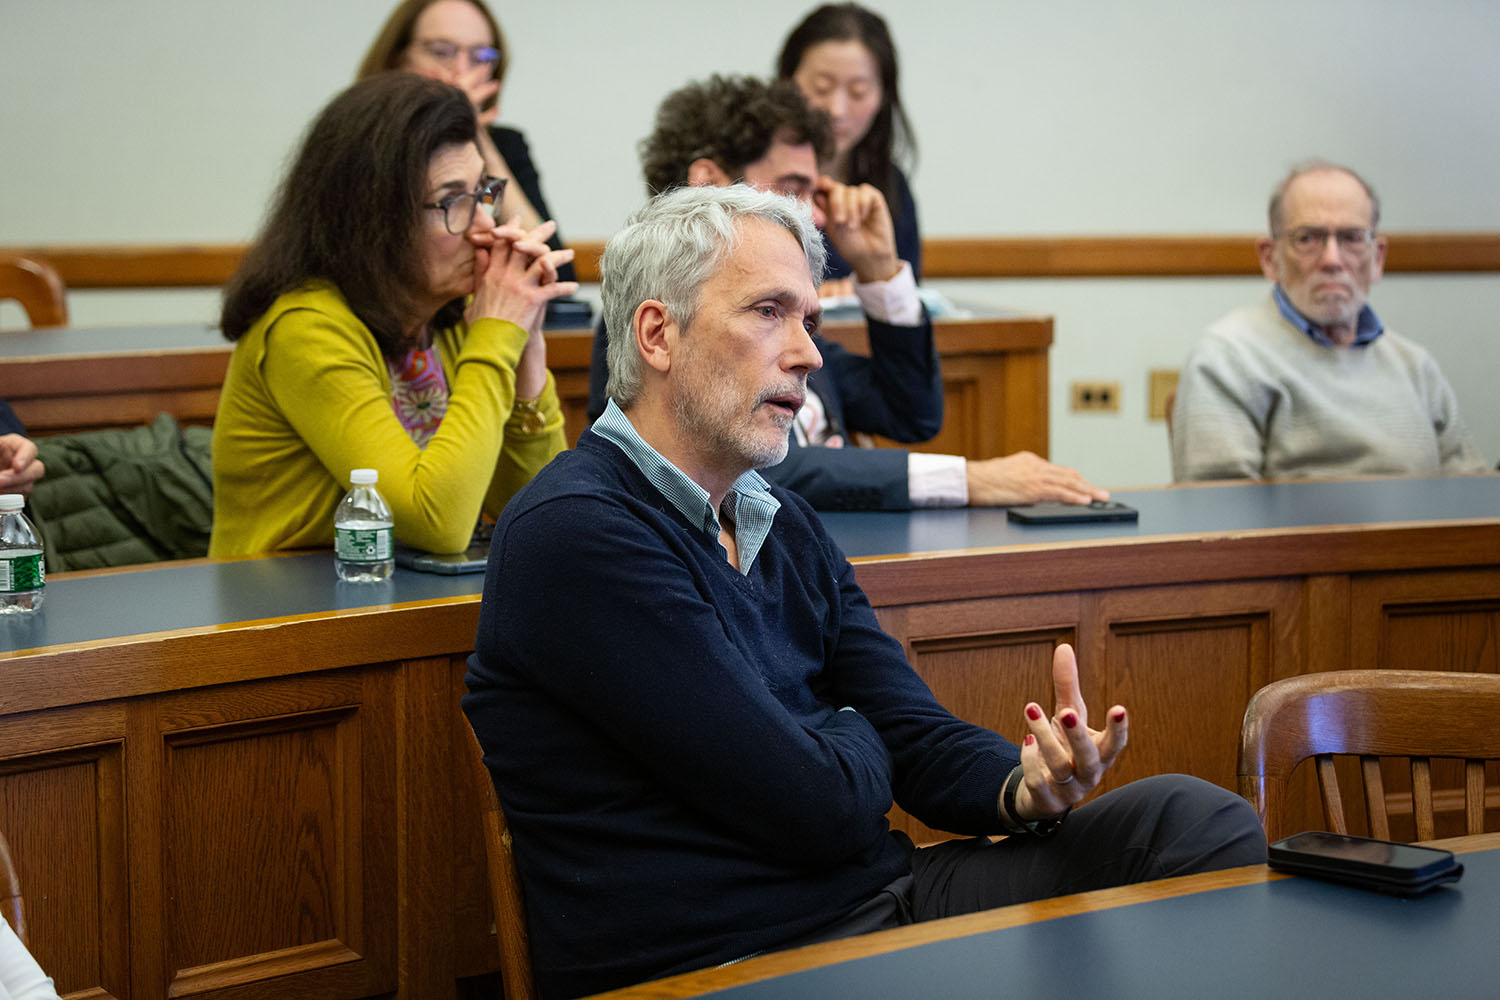 YLS Prof. Ian Ayres &#039;86 (foreground) asking a question, while Marianna Ayres, Yale Econ. Prof. John Geanakoplos, and YLS Prof. Al Klevorick (background) listen